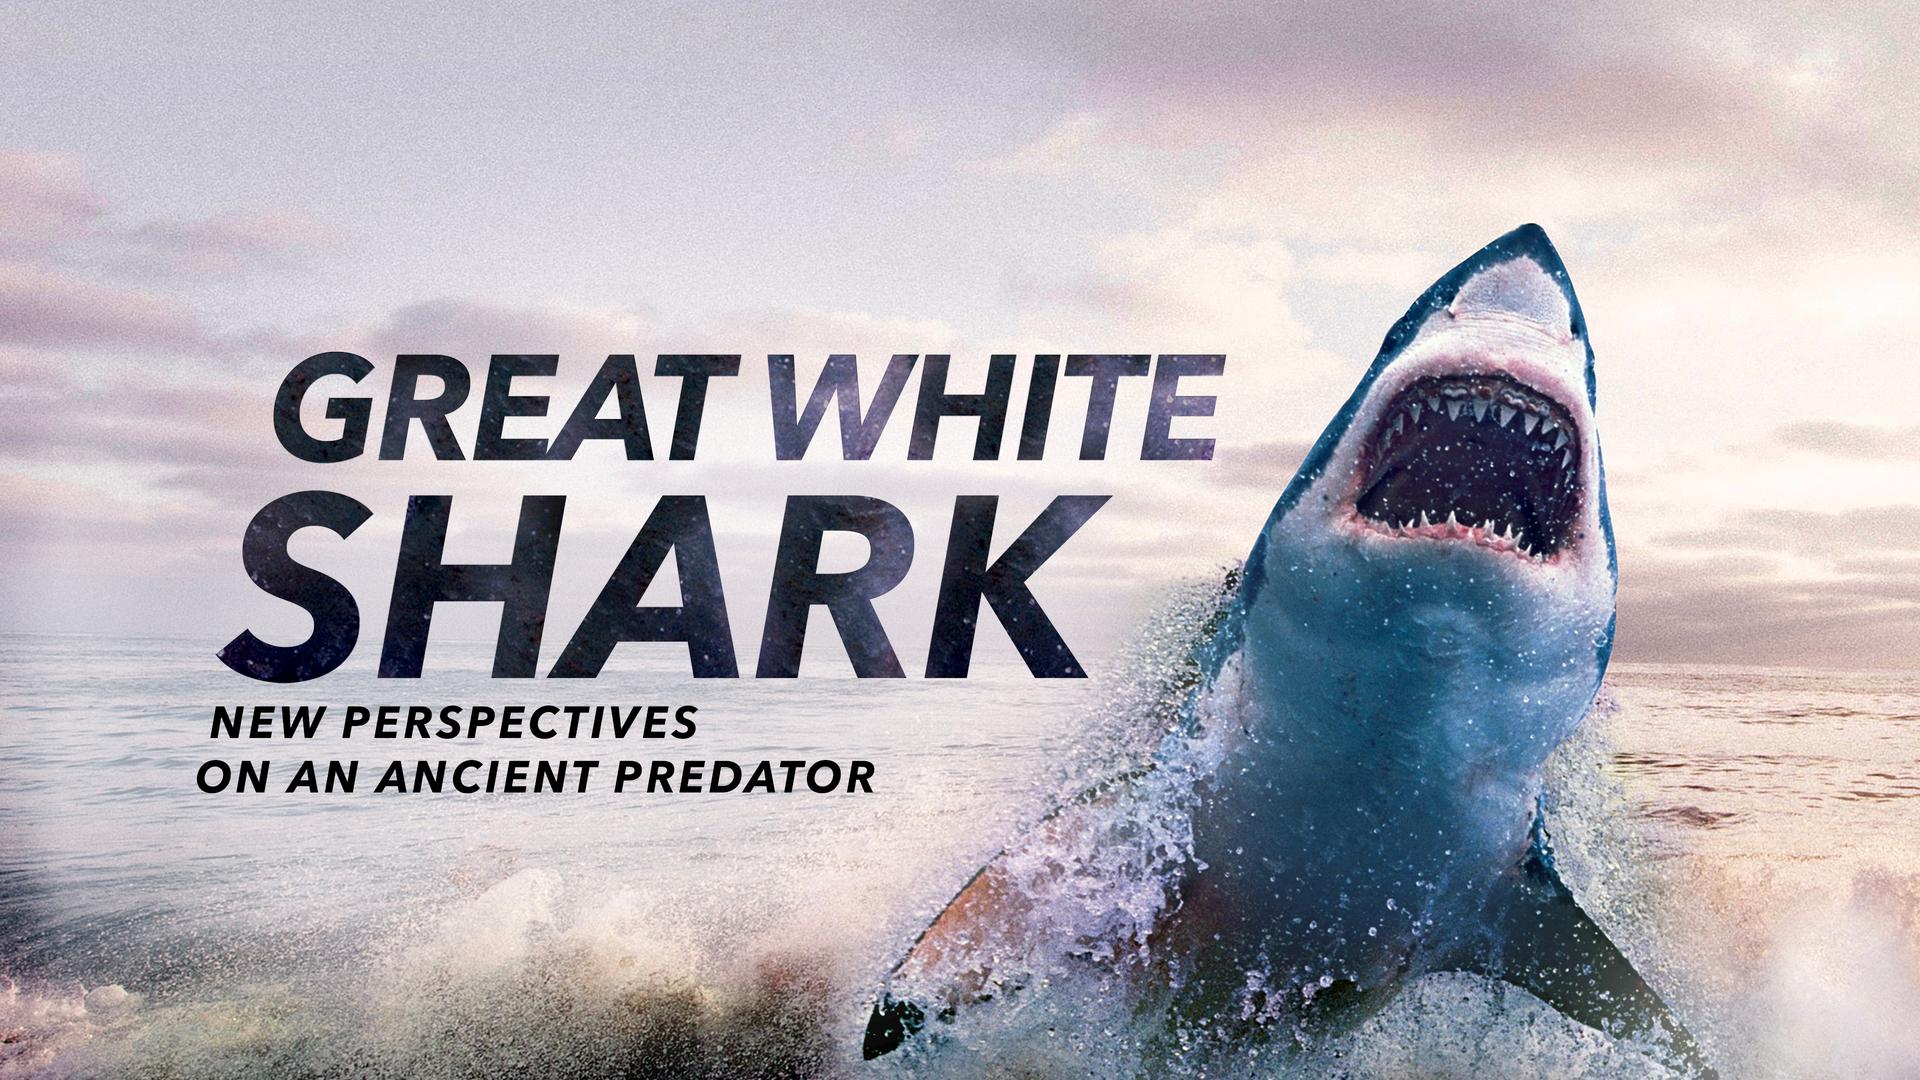 Great White Shark: New Perspectives on an Ancient Predator